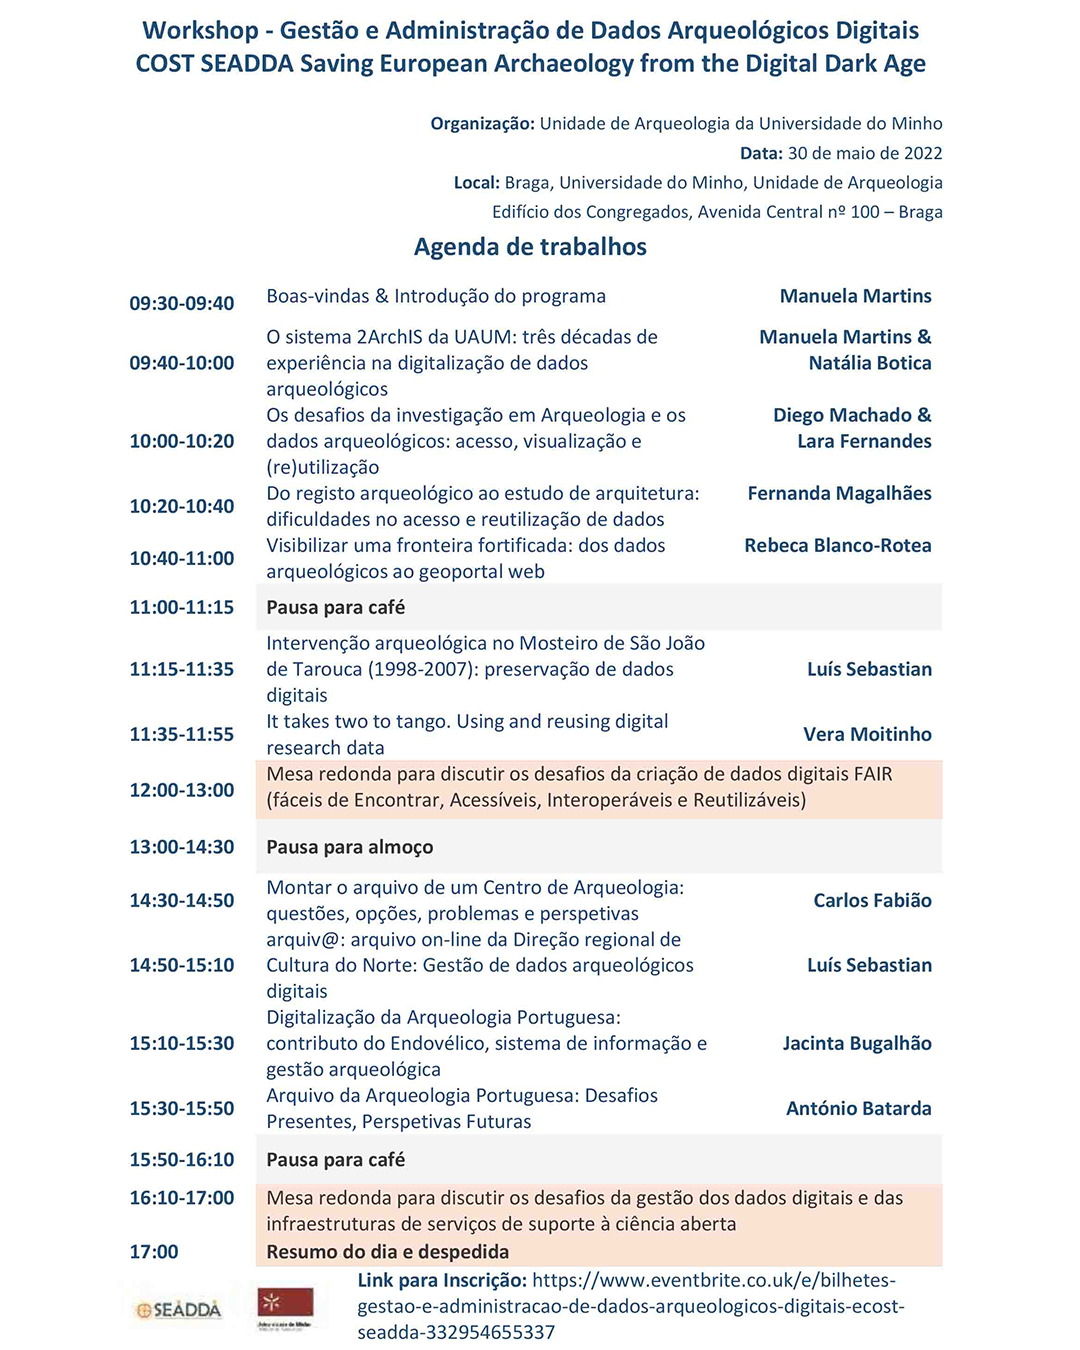 Workshop - Management and Administration of Digital Archaeological Data (COST Action SEADDA) – Open Registration image